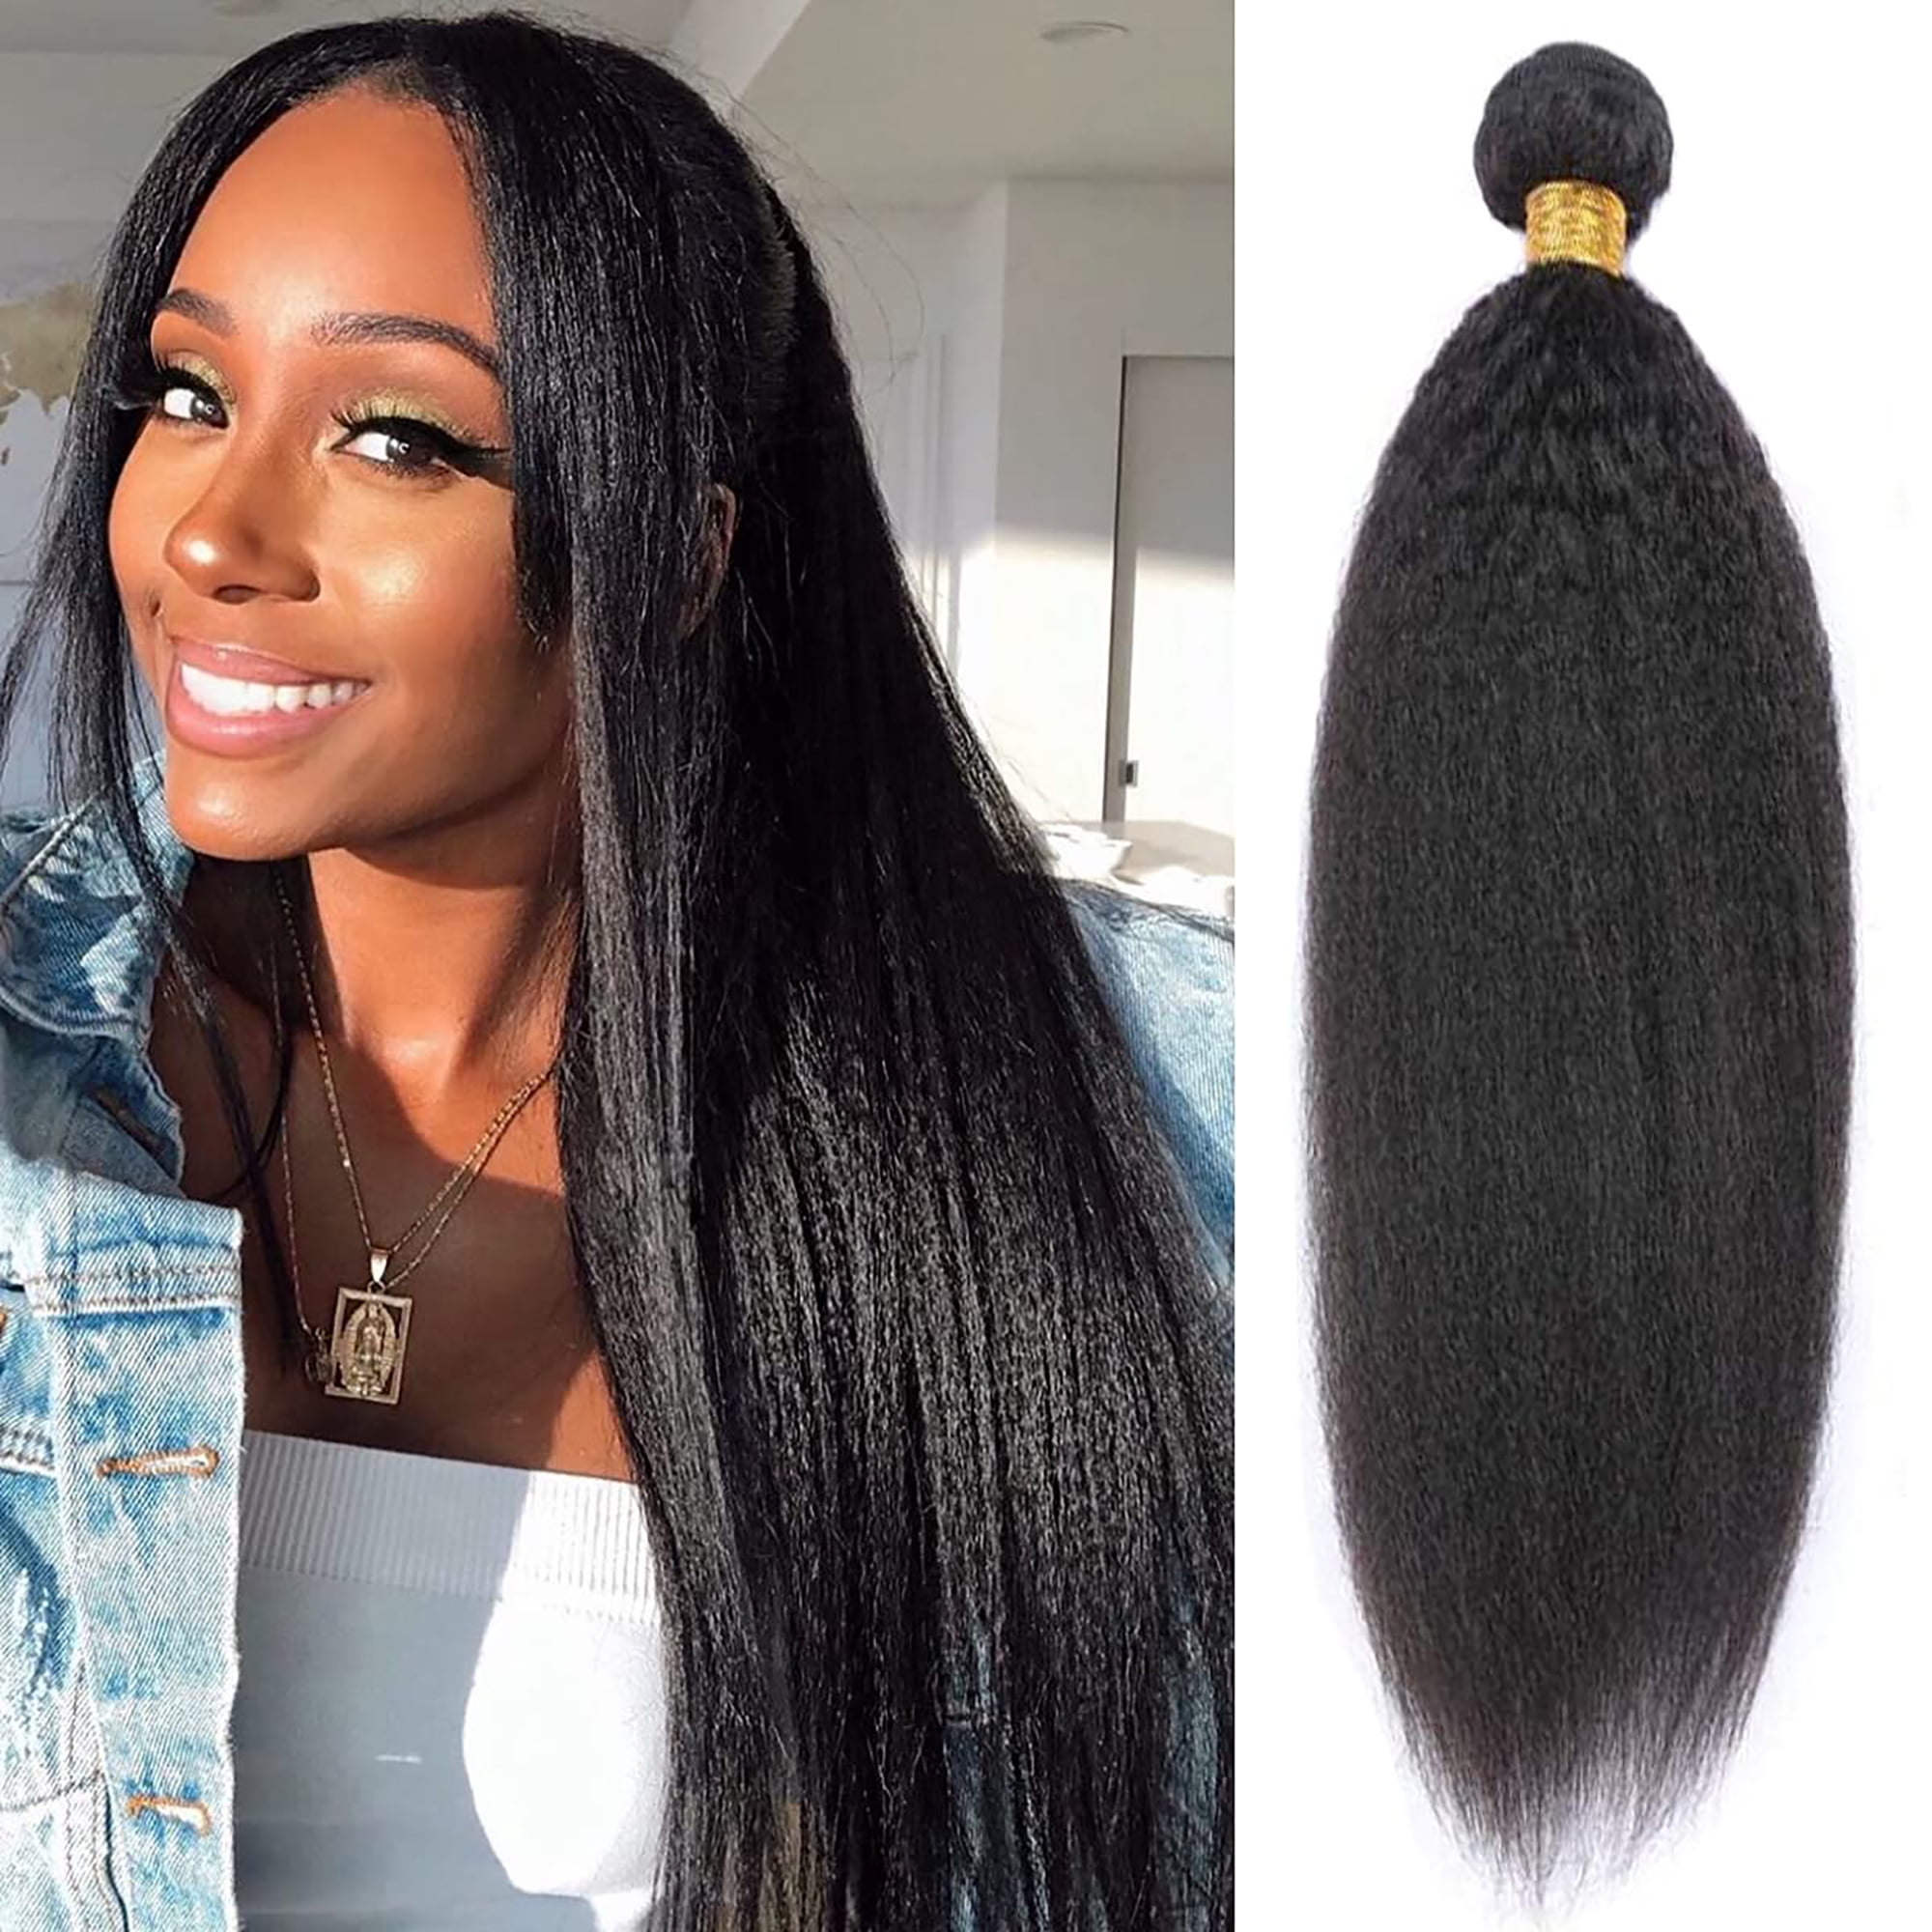 Full Shine Kinky Straight Weave Black Hair Extensions Sew in Hair Extensions  Weft 16 inch Human Hair Bundles 100g 